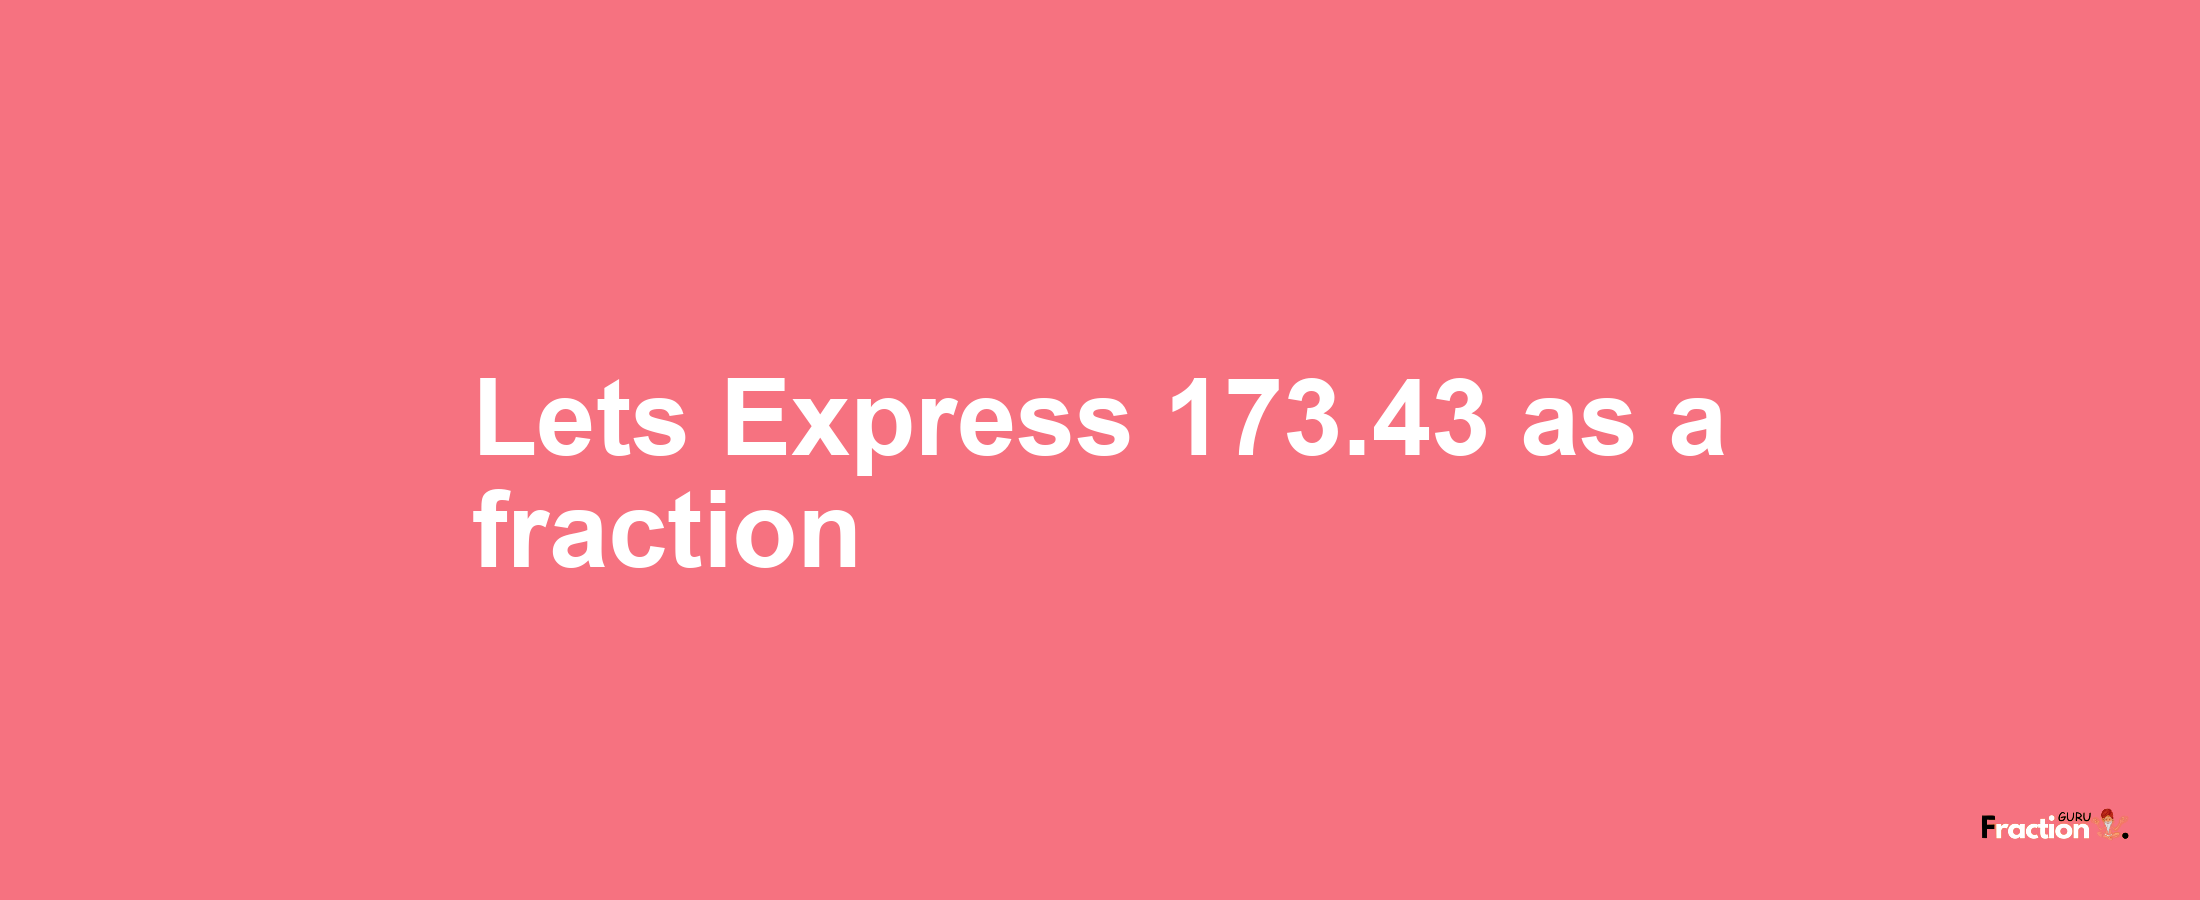 Lets Express 173.43 as afraction